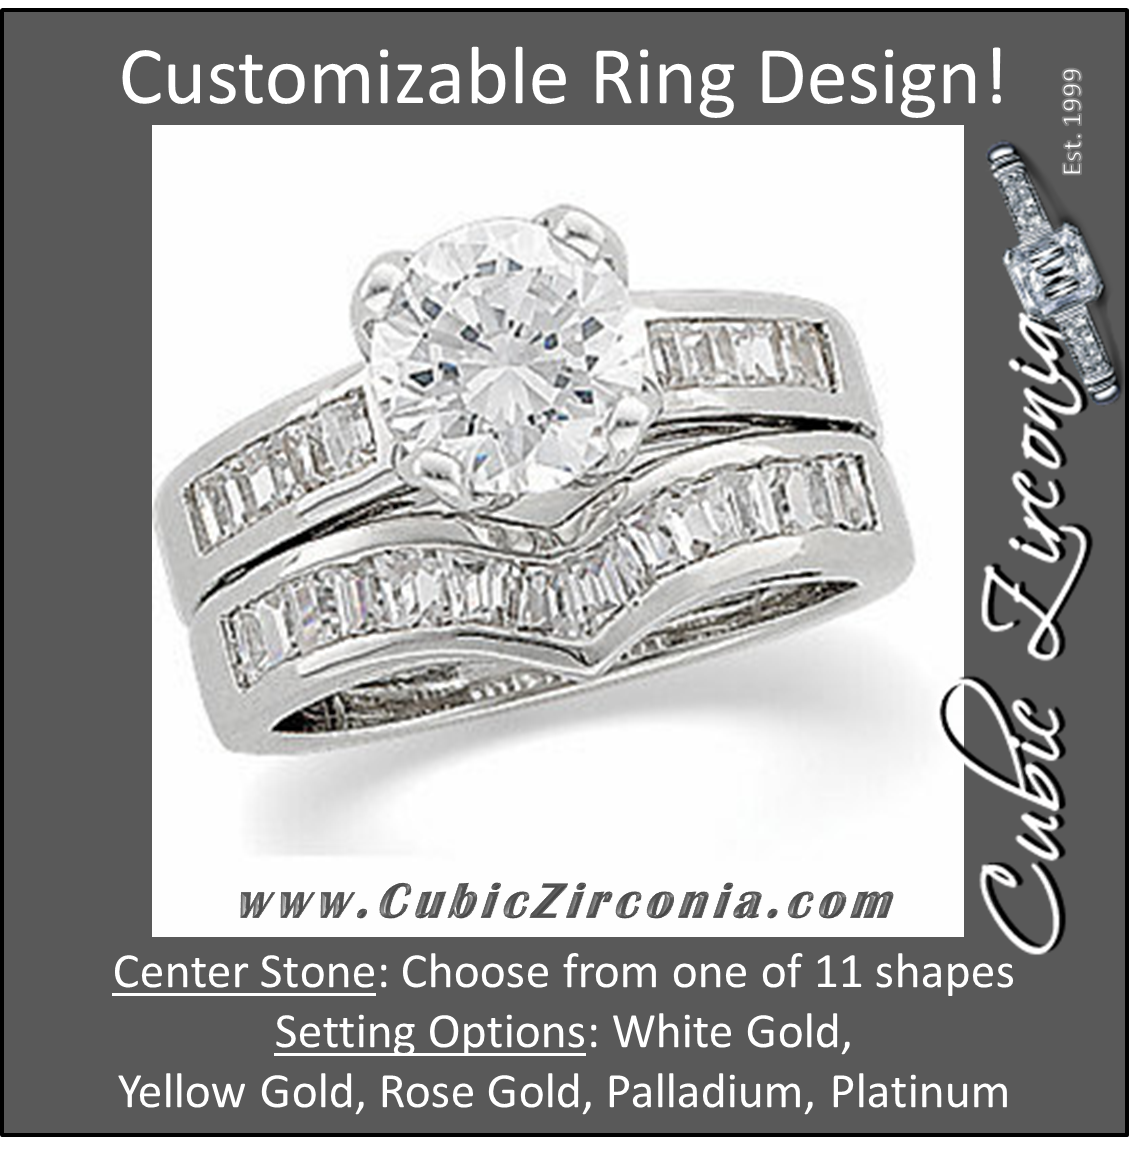 CZ Wedding Set, *Clearance* Style 05-11 feat The Rochelle Engagement Ring (5.0 Carat Round Cut Baguette Channel in 10K White Gold)